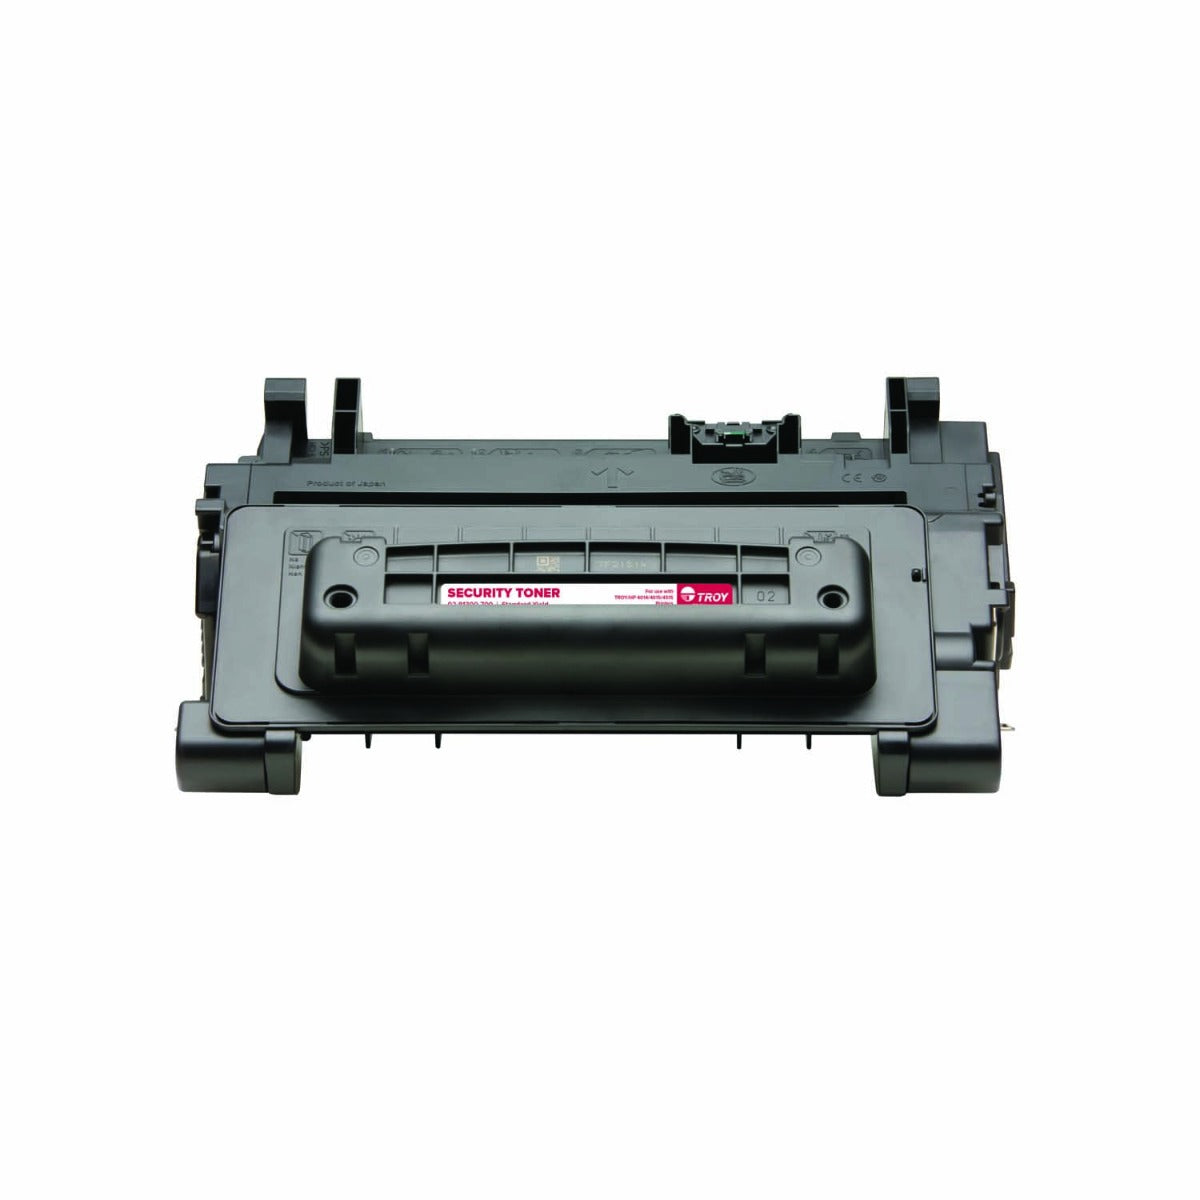 TROY M4014/M4015/4515 Security Toner Standard Yield